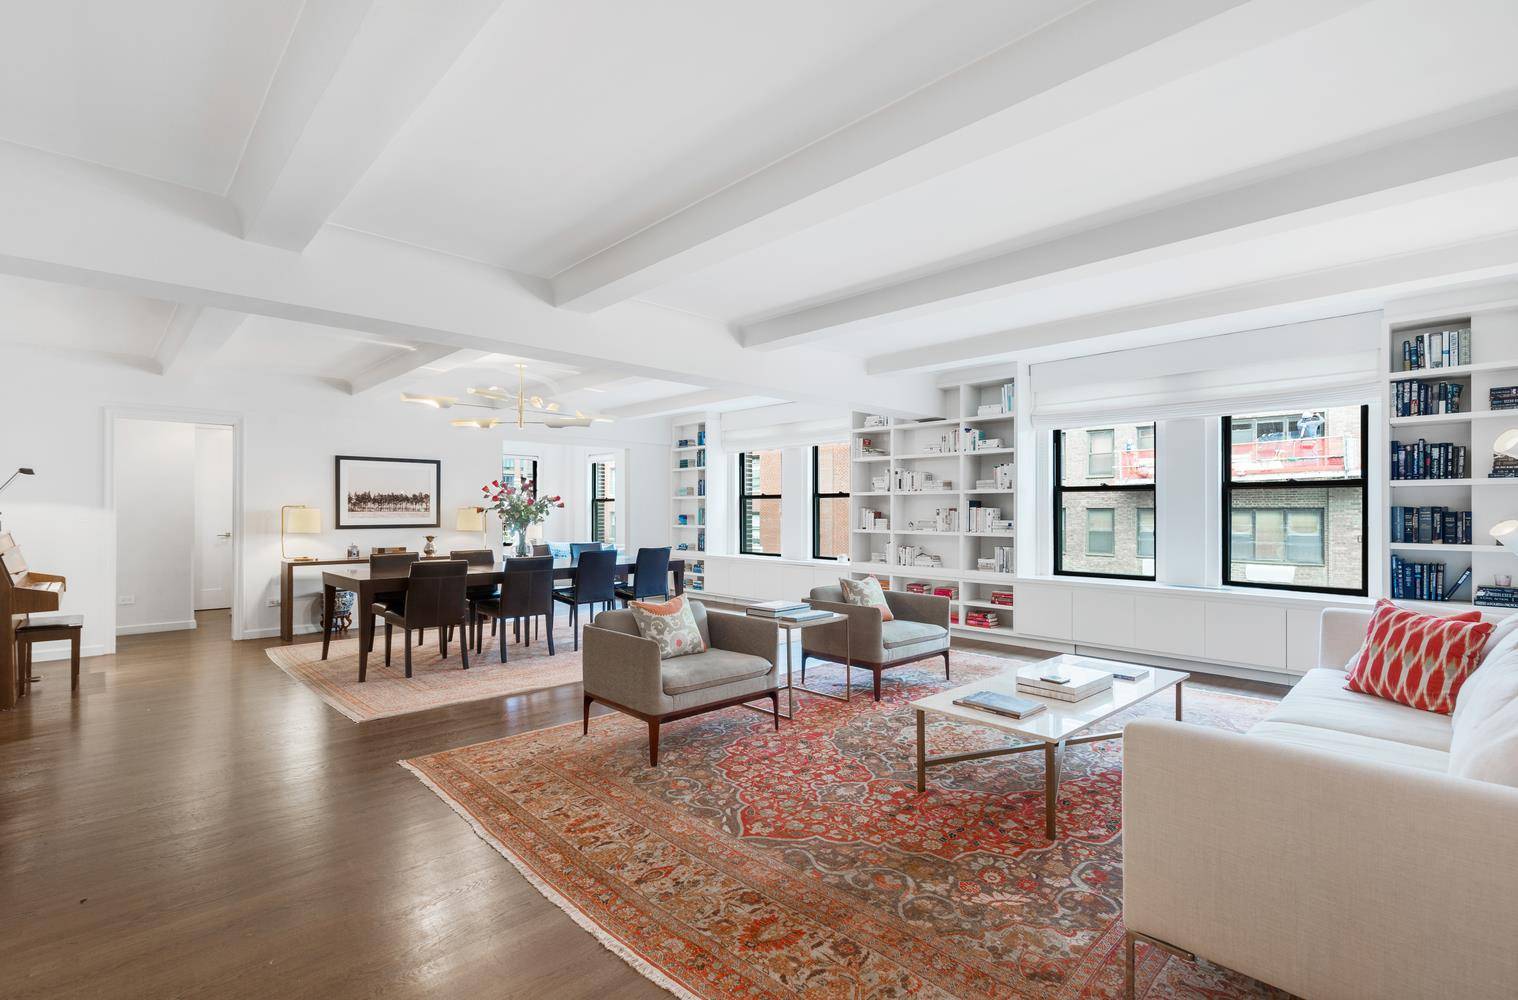 This luxurious Three Bedroom with Library, Two and a half Bathroom cooperative encompasses two adjacent apartments that were combined and meticulously renovated to create a magnificent prewar home.